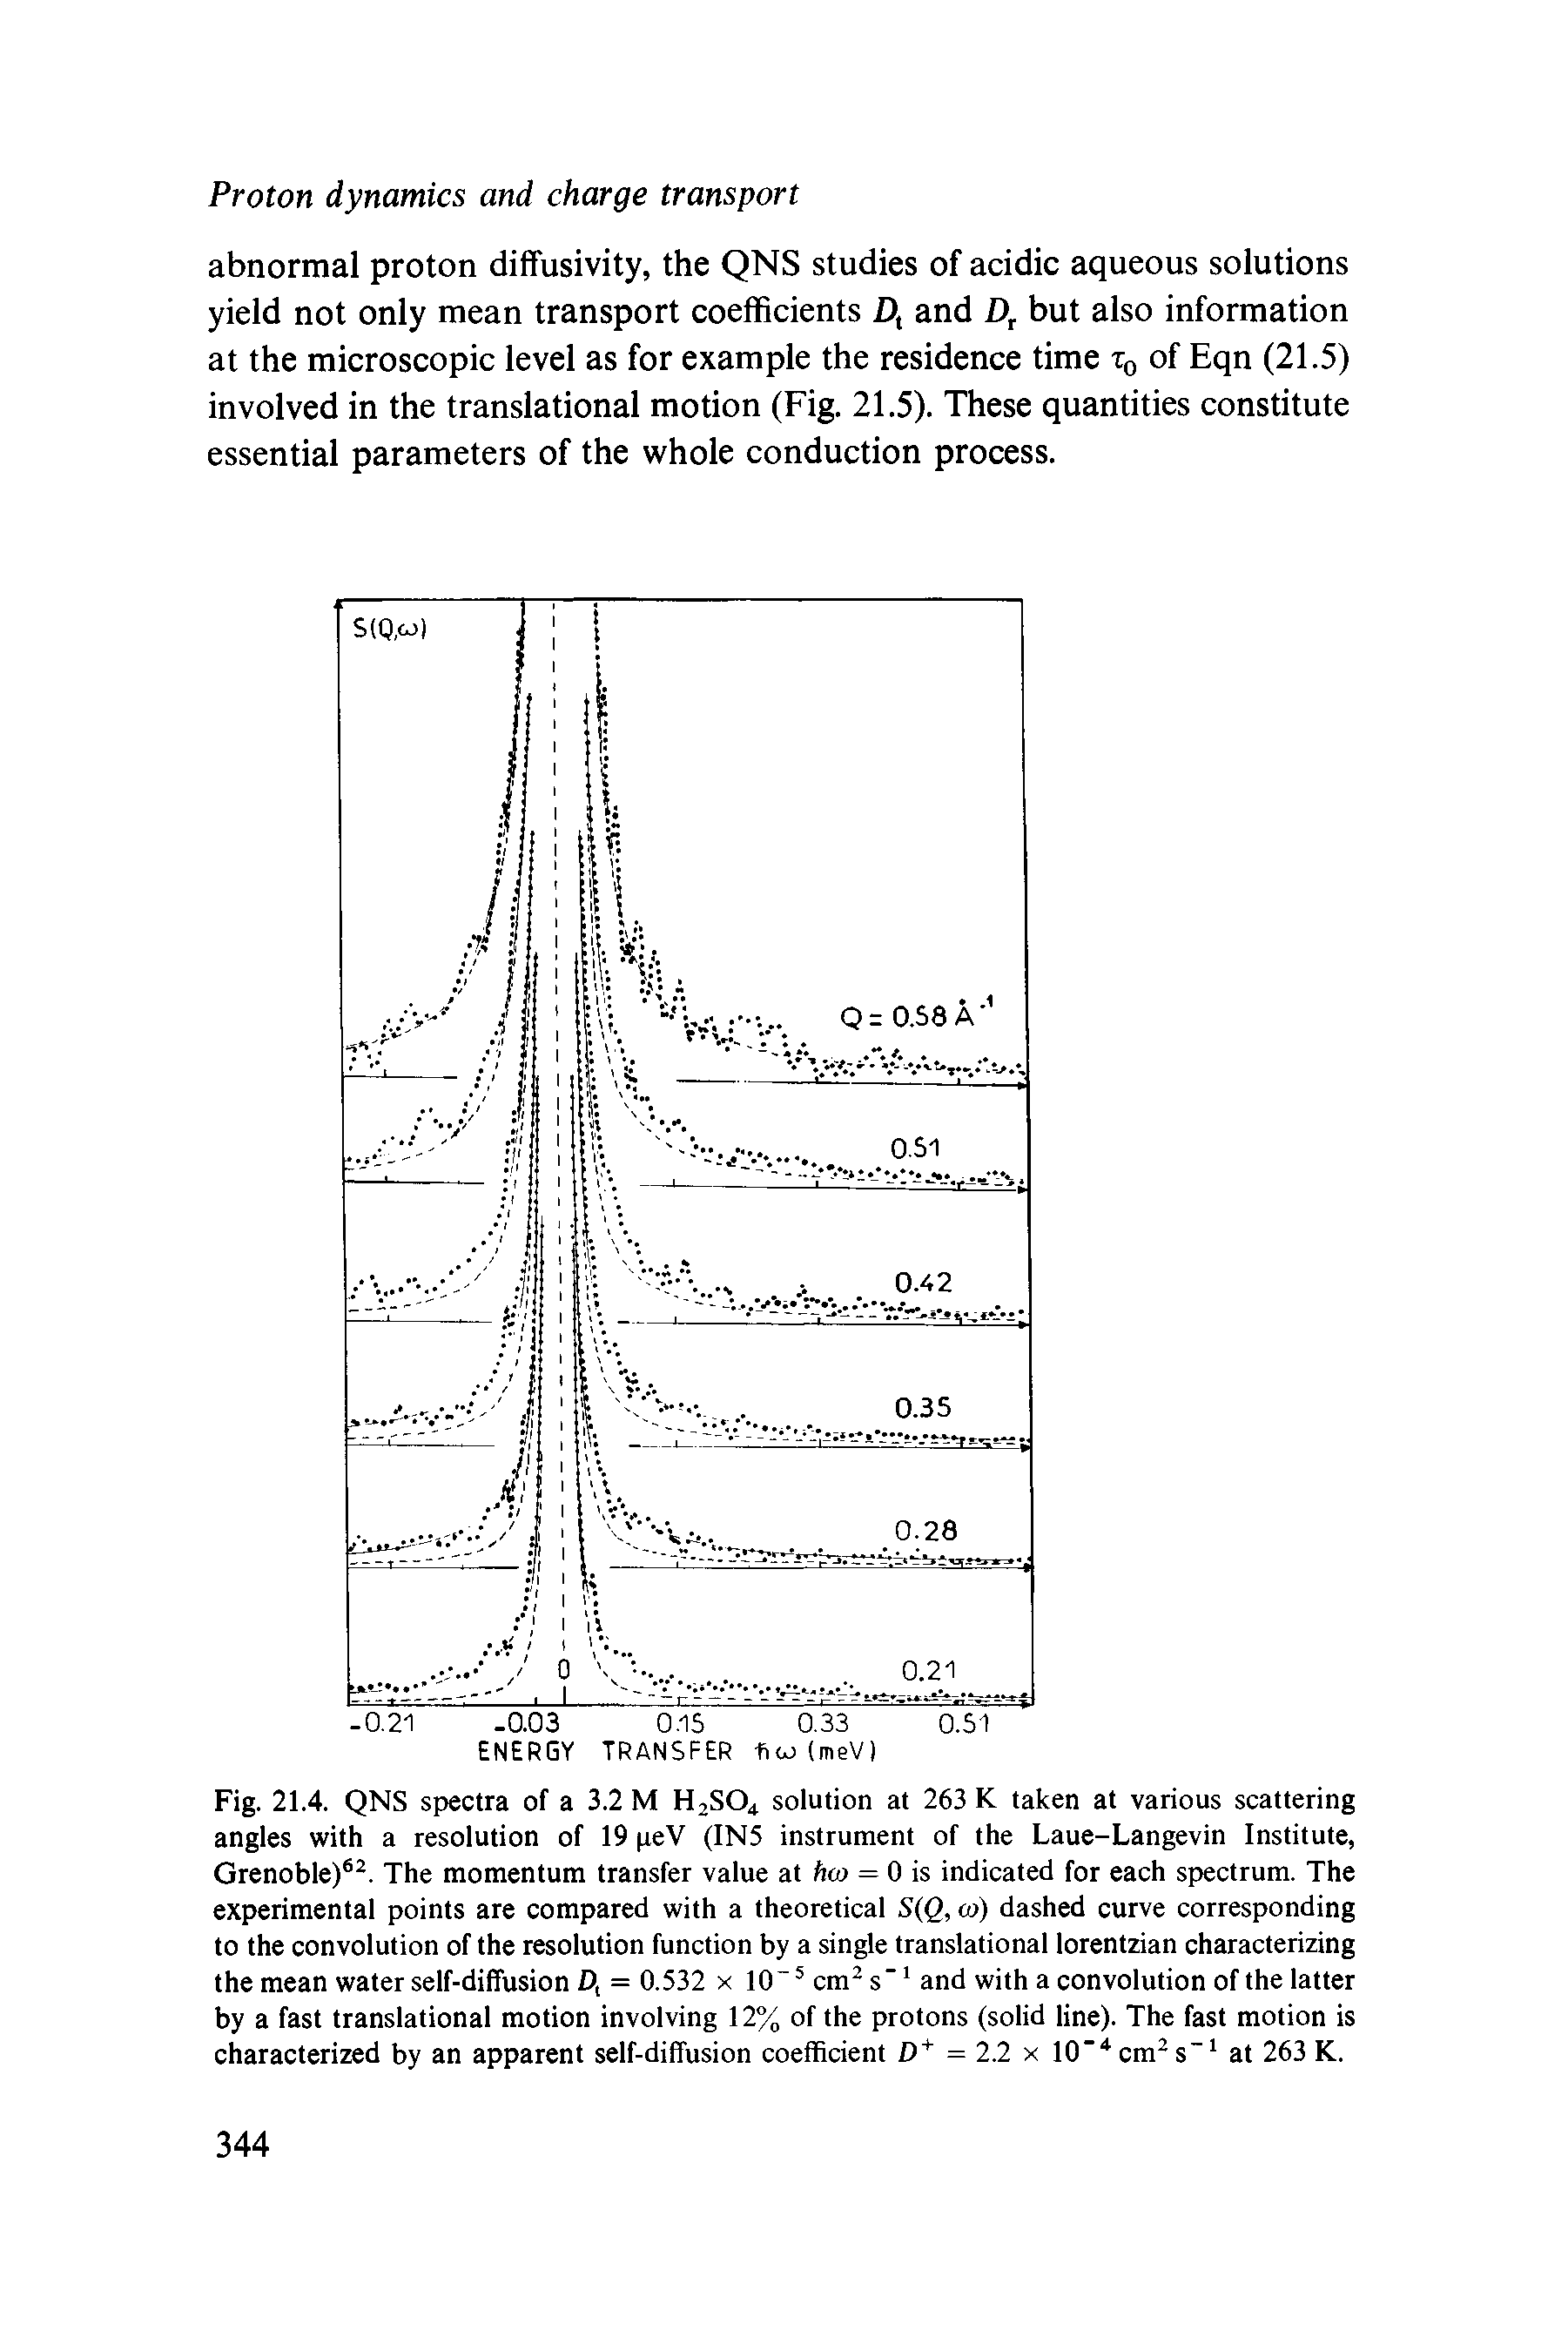 Fig. 21.4. QNS spectra of a 3.2 M H2SO4 solution at 263 K taken at various scattering angles with a resolution of 19 peV (INS instrument of the Laue-Langevin Institute, Grenoble) . The momentum transfer value at fico = 0 is indicated for each spectrum. The experimental points are compared with a theoretical S(Q, co) dashed curve corresponding to the convolution of the resolution function by a single translational lorentzian characterizing the mean water self-diffusion D, = 0.532 x 10 cm s" and with a convolution of the latter by a fast translational motion involving 12% of the protons (solid line). The fast motion is characterized by an apparent self-diffusion coefficient D = 2.2 x 10" cm s at 263 K.